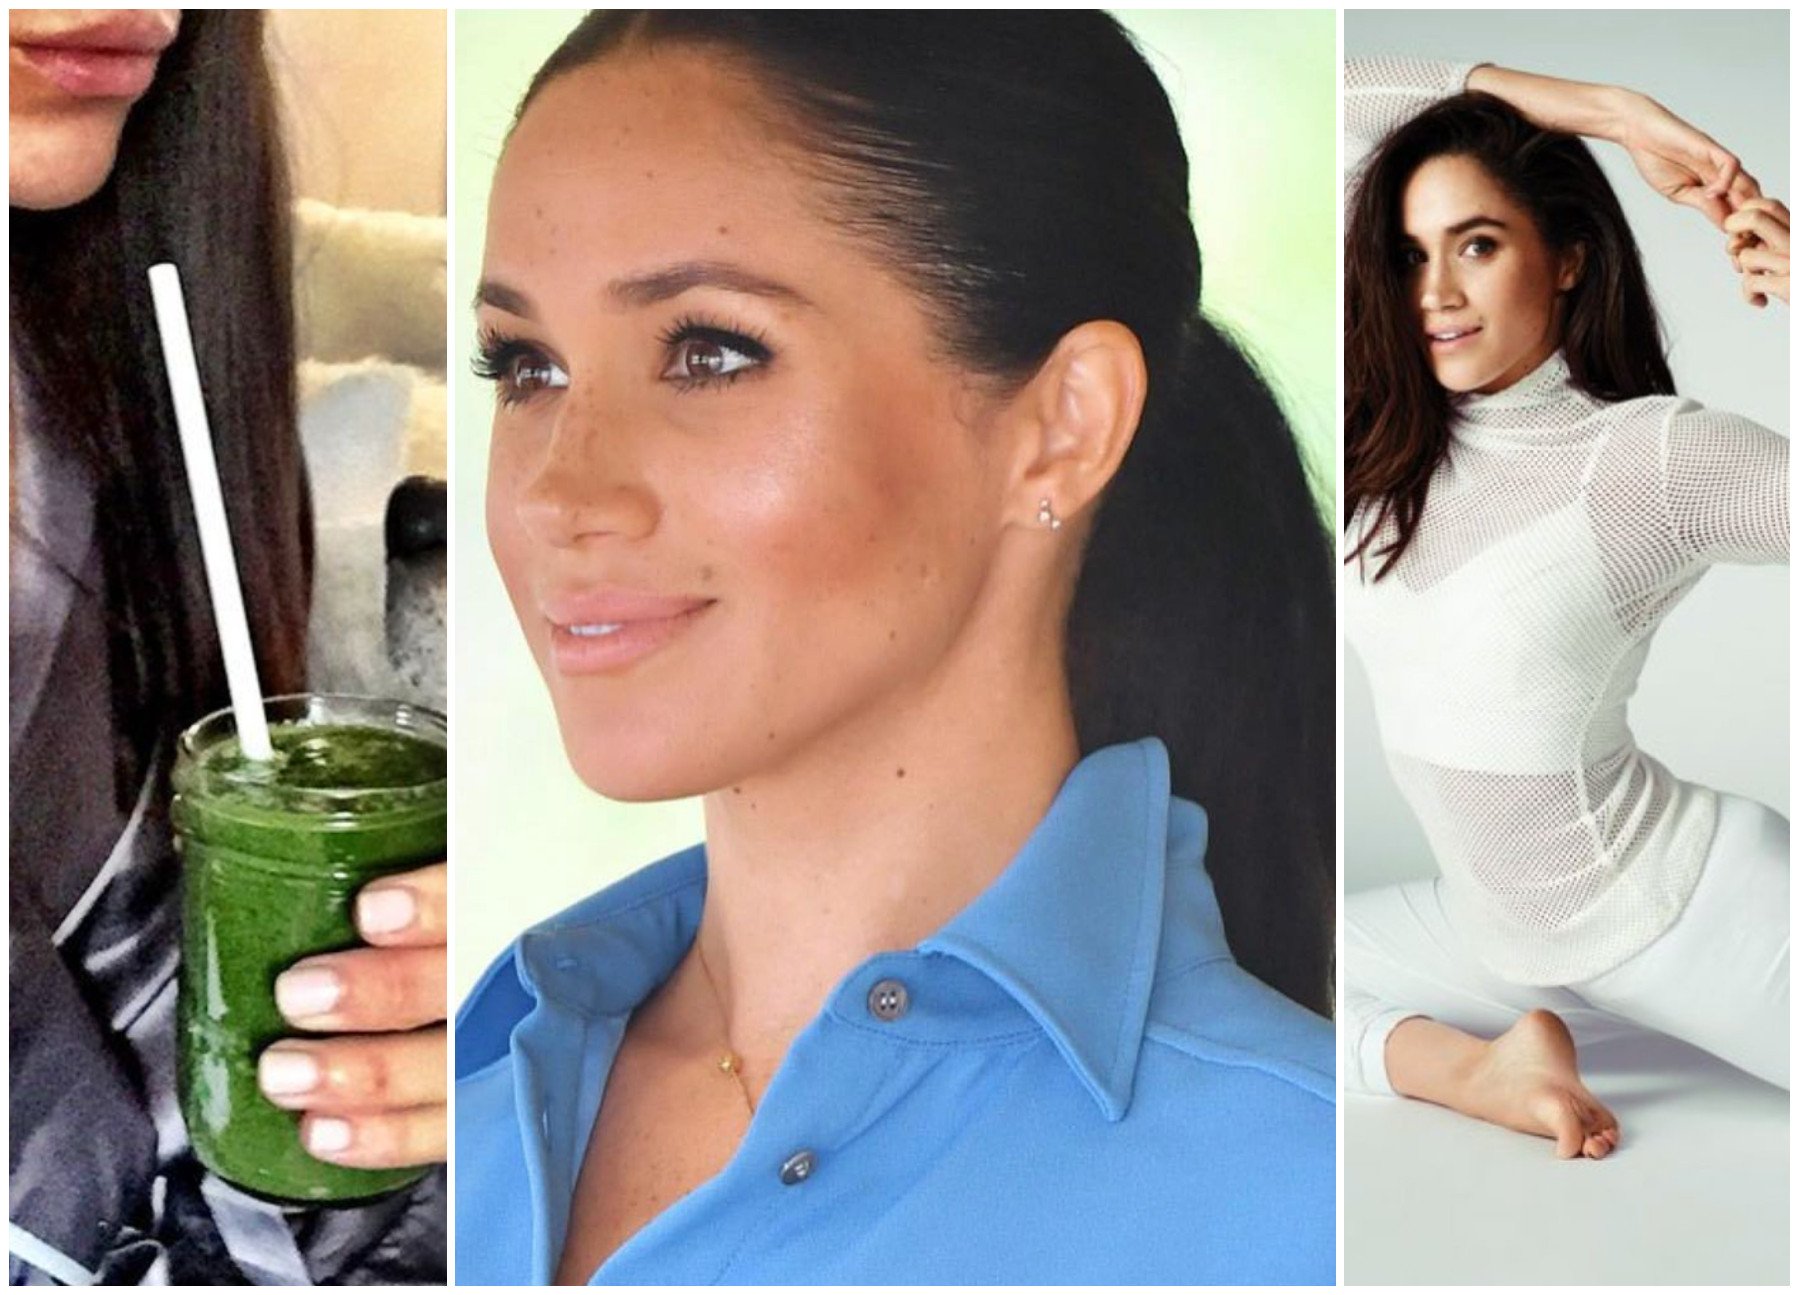 Meghan Markle keeps her sparkle amid the storm of controversy around her and husband Prince Harry by paying close attention to her health and wellness regime. Photos: @meghanmarkle, @marklemeganoffical/Instagram; @theKGofficial/Twitter